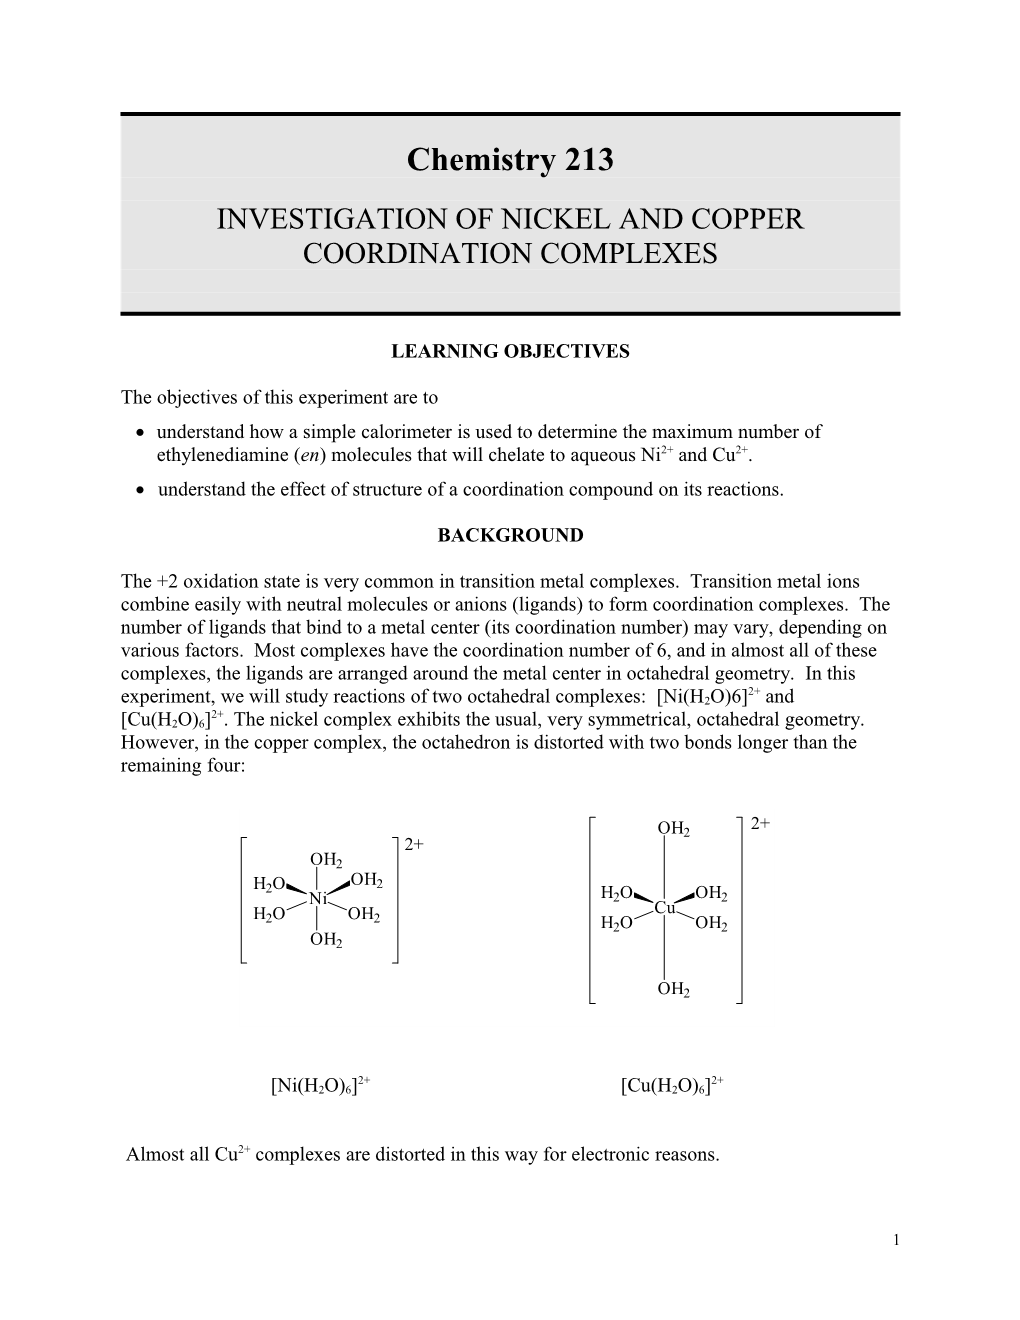 Expt #8: Investigation of Some Nickel and Copper Coordination Compounds